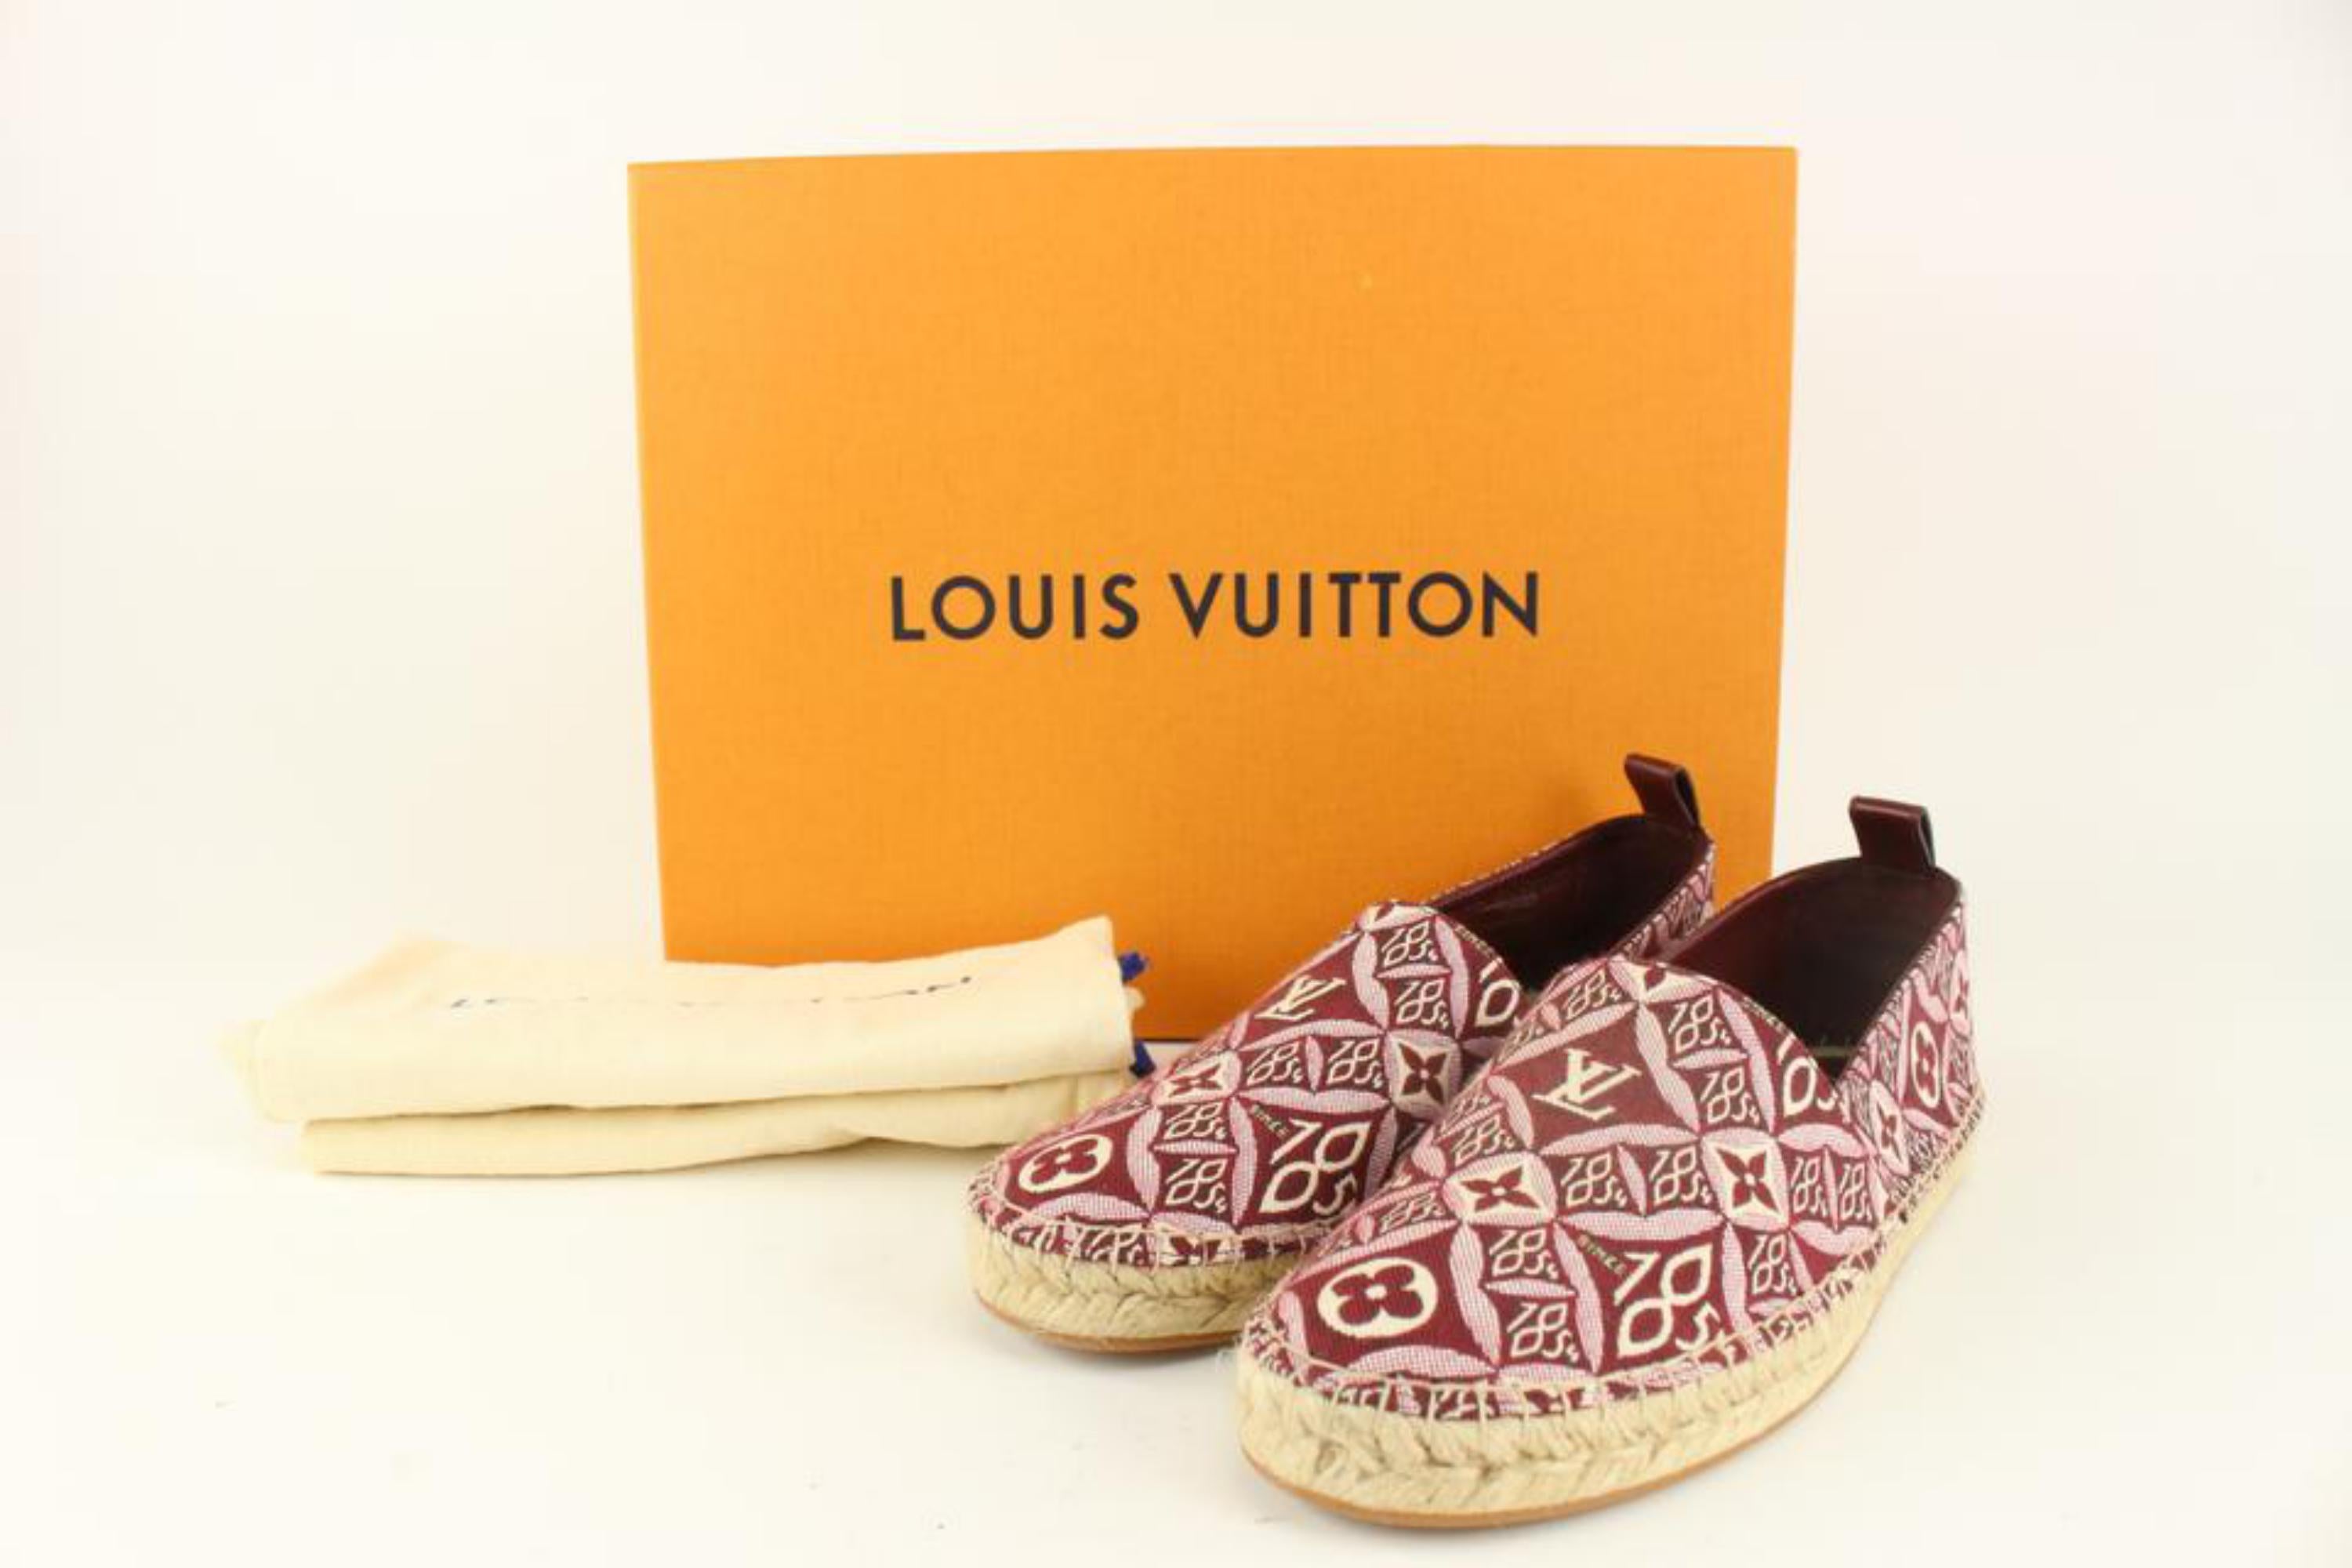 Louis Vuitton Womens Sz 40 Burgundy Since 1854 Starboard Flat Espadrille  5L415V
Date Code/Serial Number: CL0260
Made In: Italy
Measurements: Length:  10.75